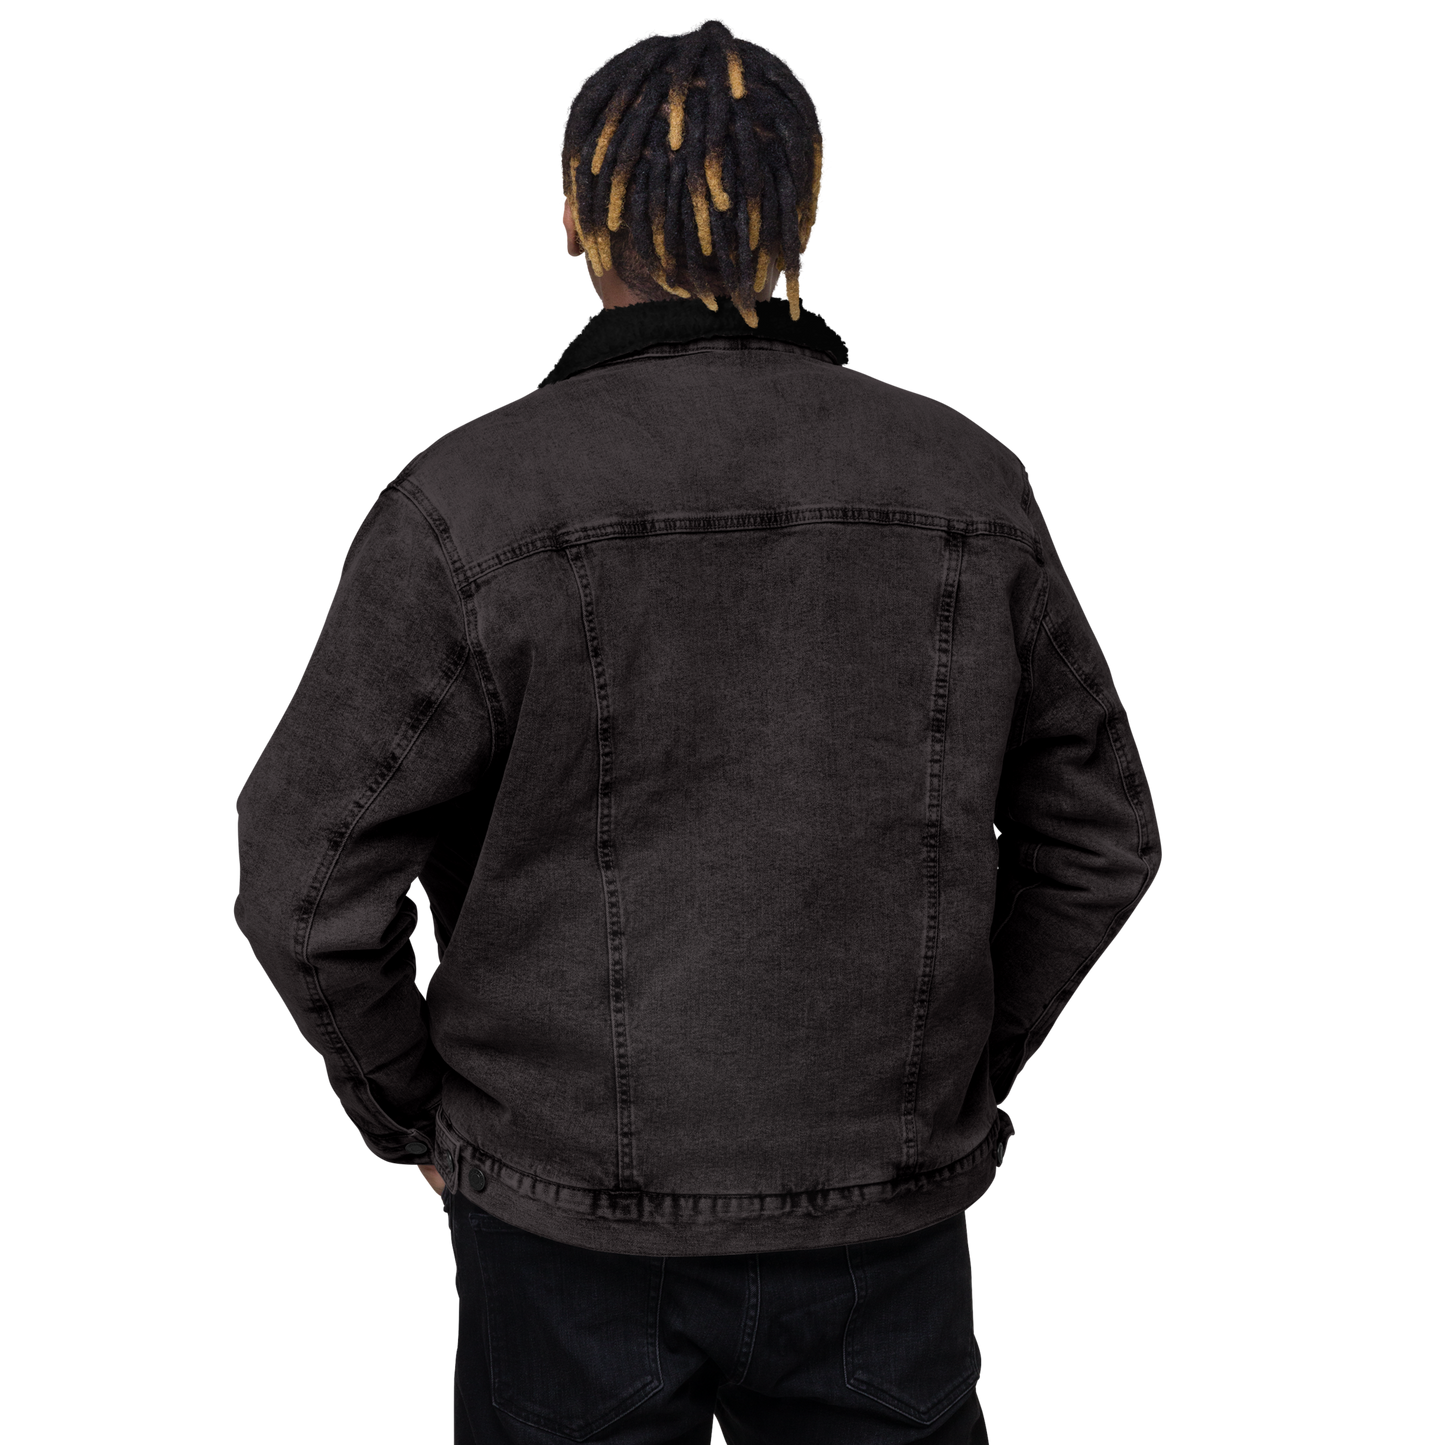 YHM Designs - YHZ Halifax Denim Sherpa Jacket - Crossed-X Design with Airport Code and Vintage Propliner - Black & White Embroidery - Image 09